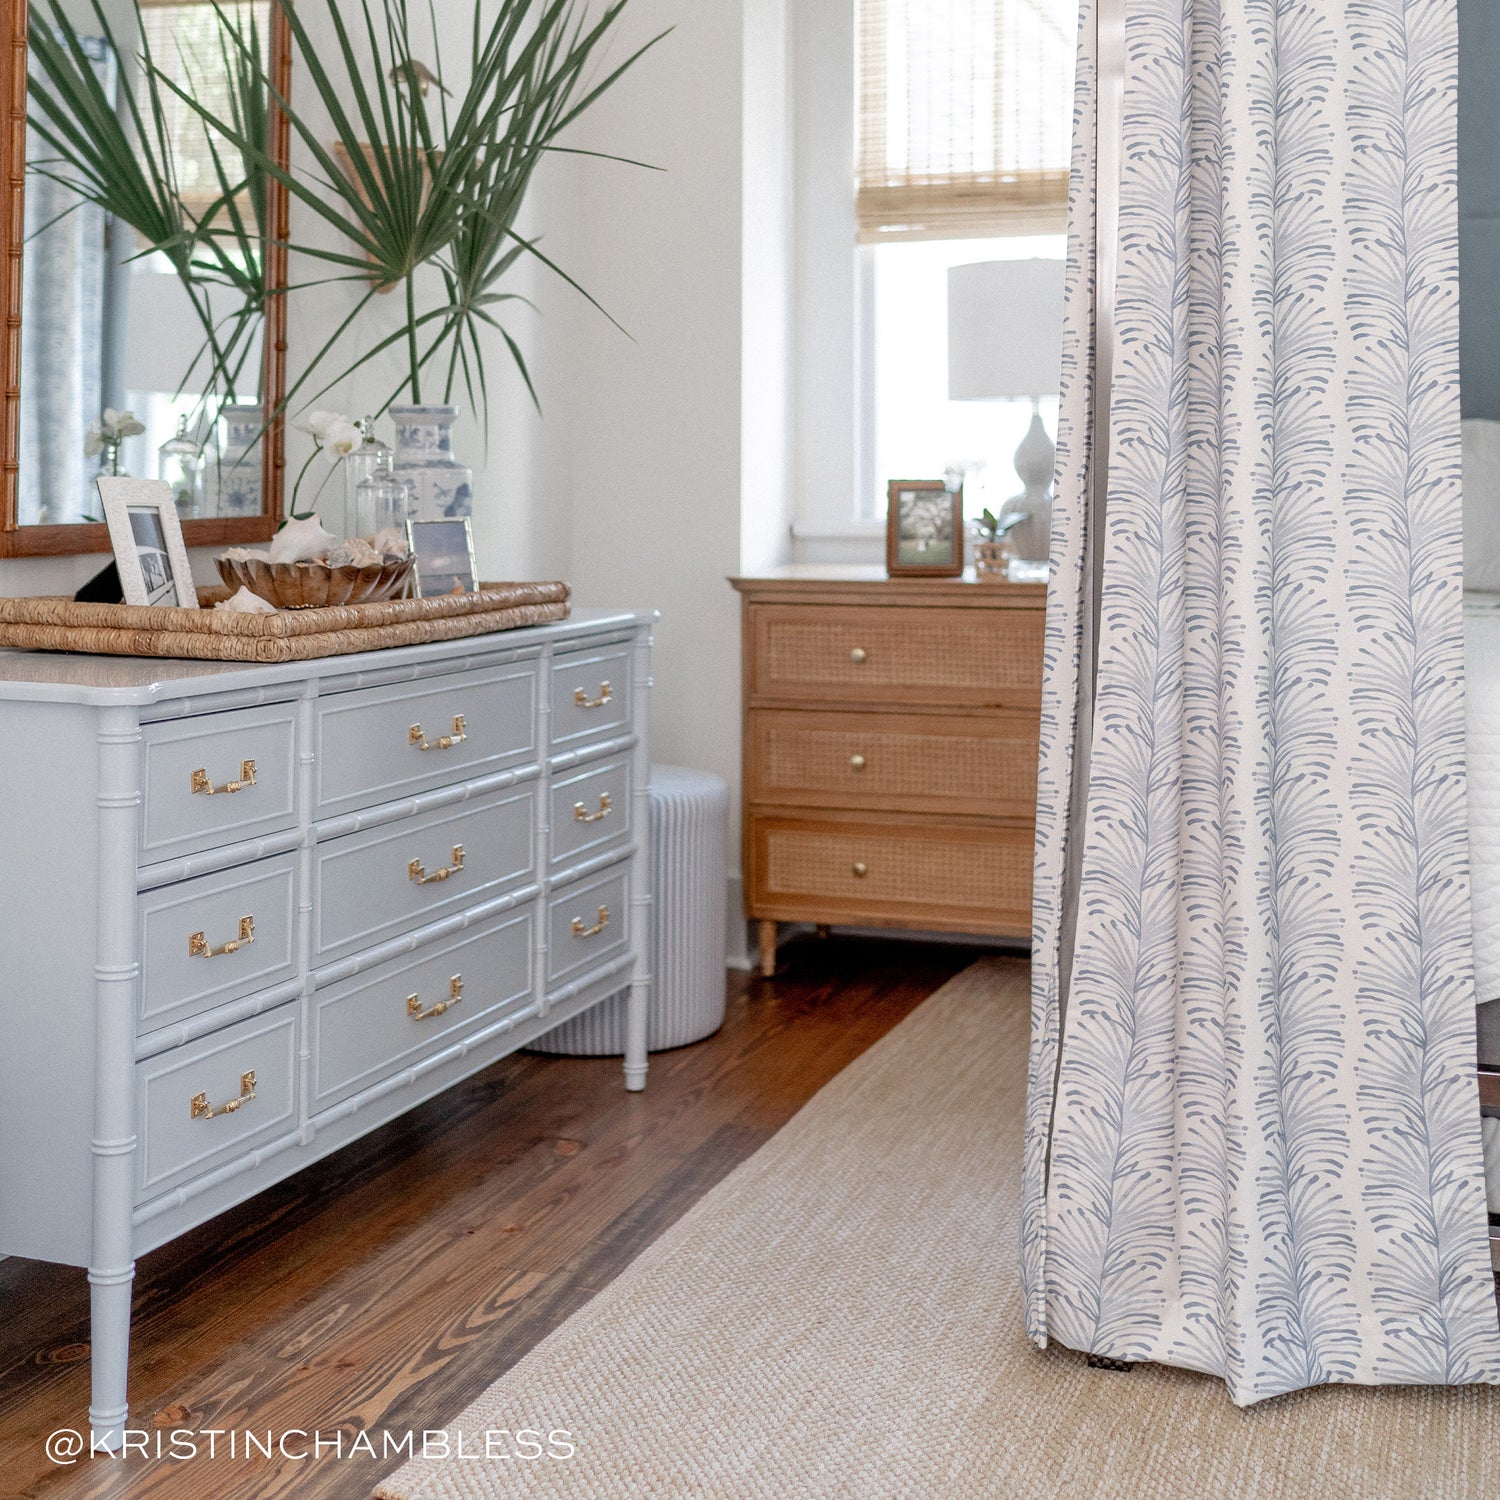 Bed styled with Sky Blue Botanical Stripe Printed Curtains hanging next to baby blue dresser with mirror hung on wall next to decorative plants. Photo taken by Kristin Chambless